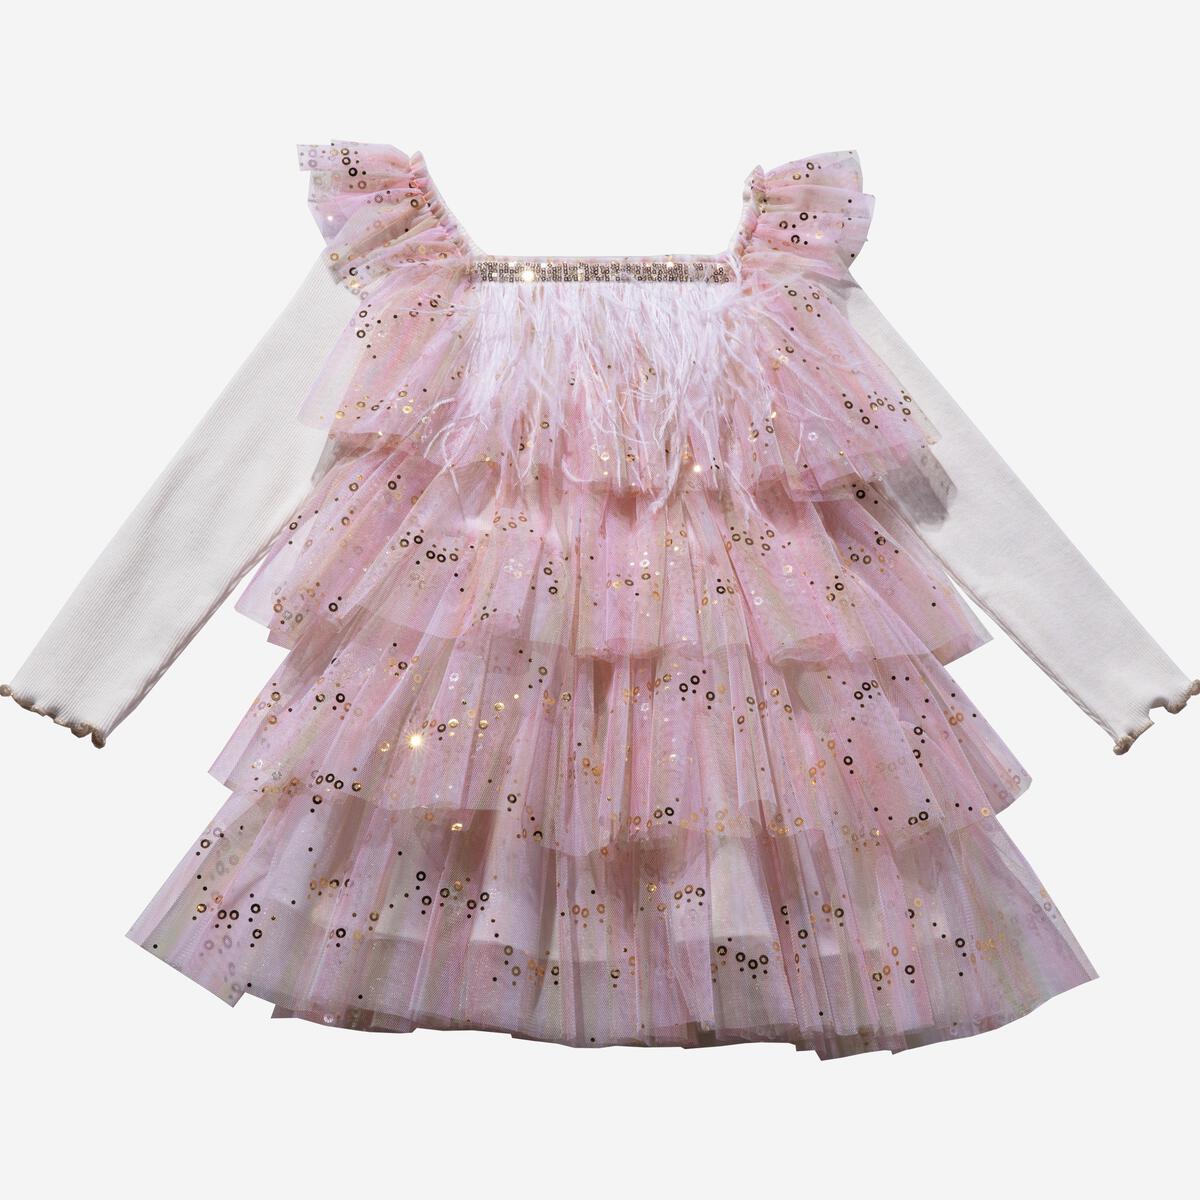 Ombre Layered Dress for baby & kid girl